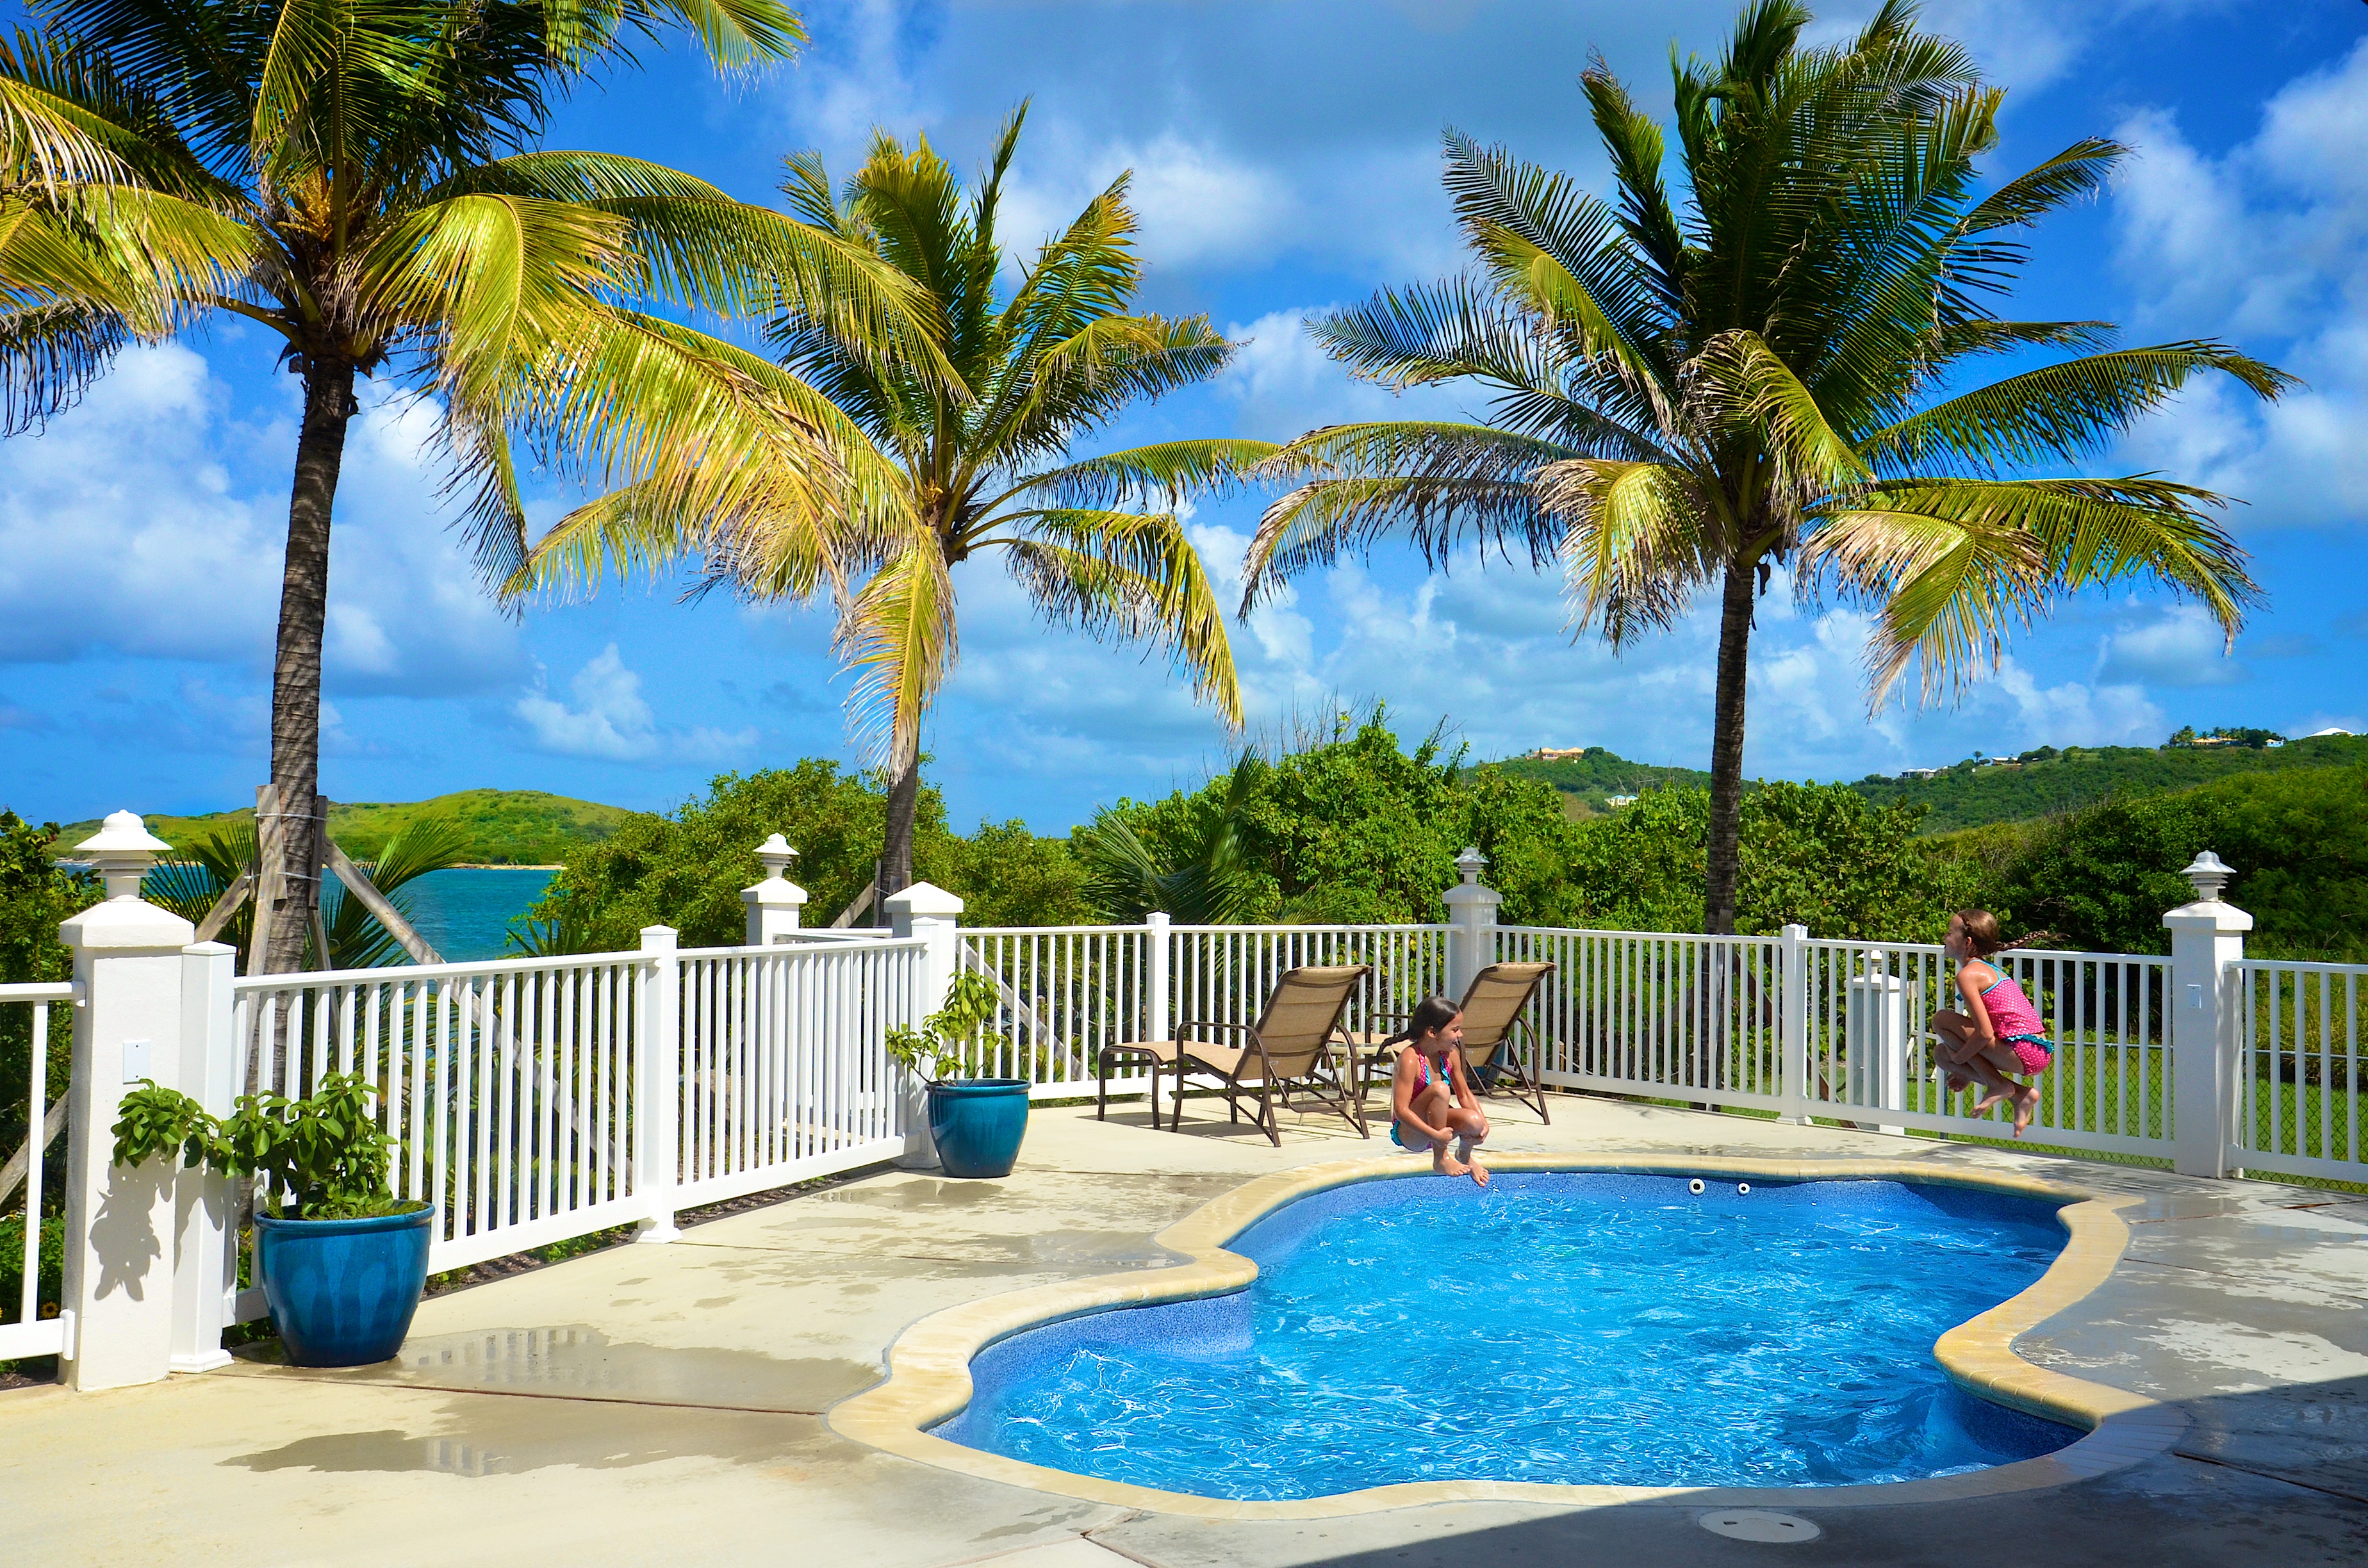 Where to Stay in St. Croix, U.S. Virgin Islands | USVI Villas, Hotels & Resorts | St. Croix Family Vacation | Pool